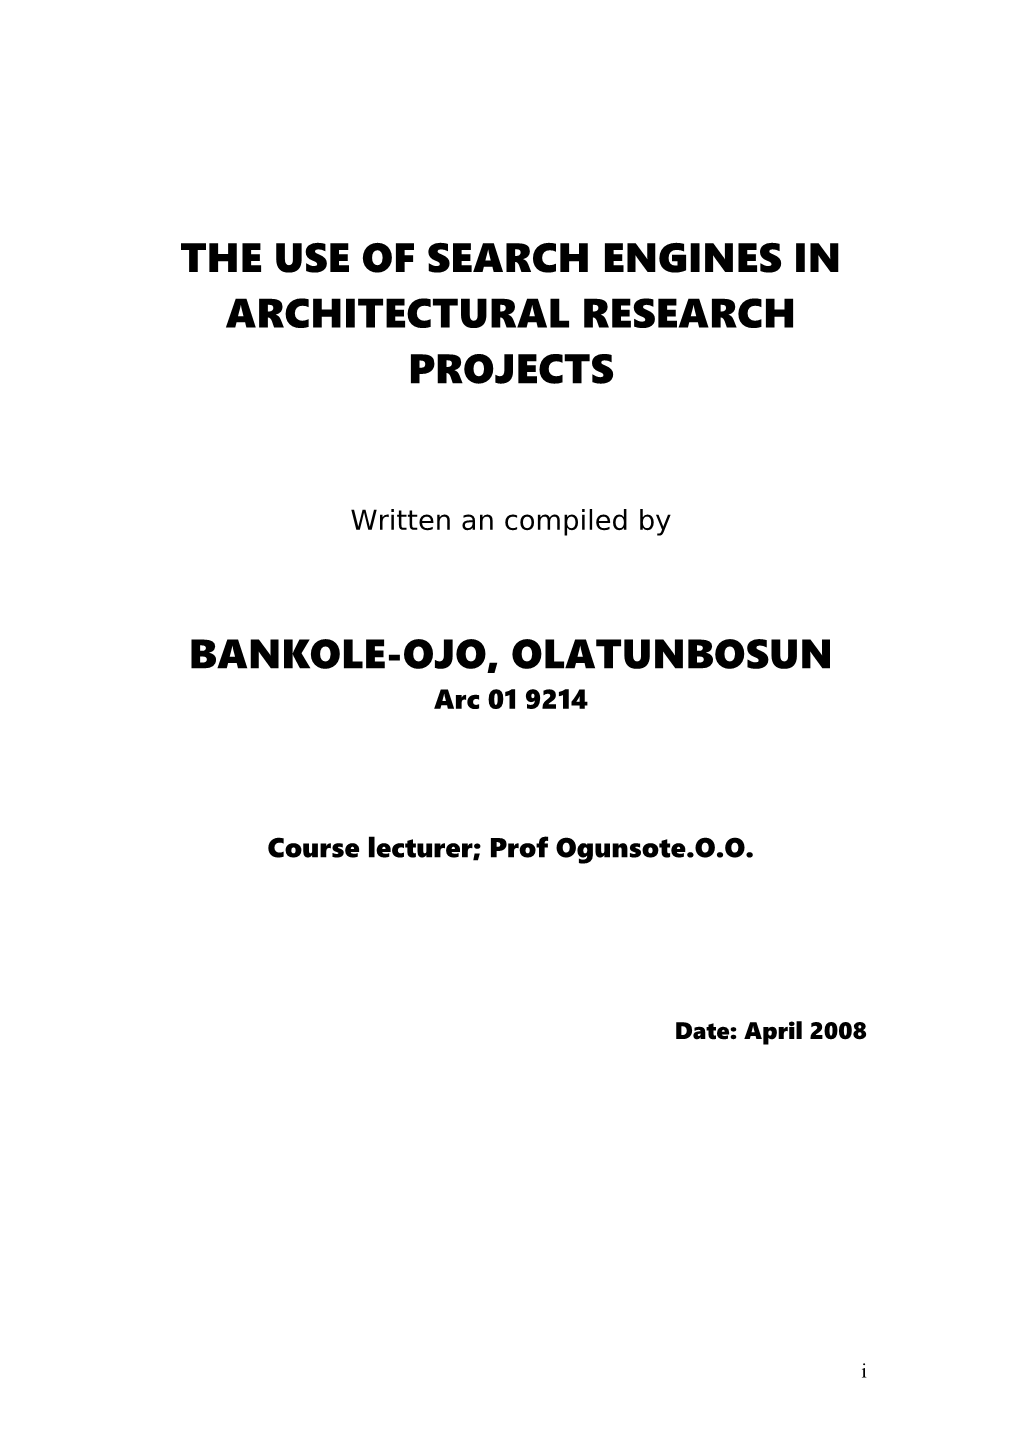 The Use of Search Engines in Architectural Research Projects